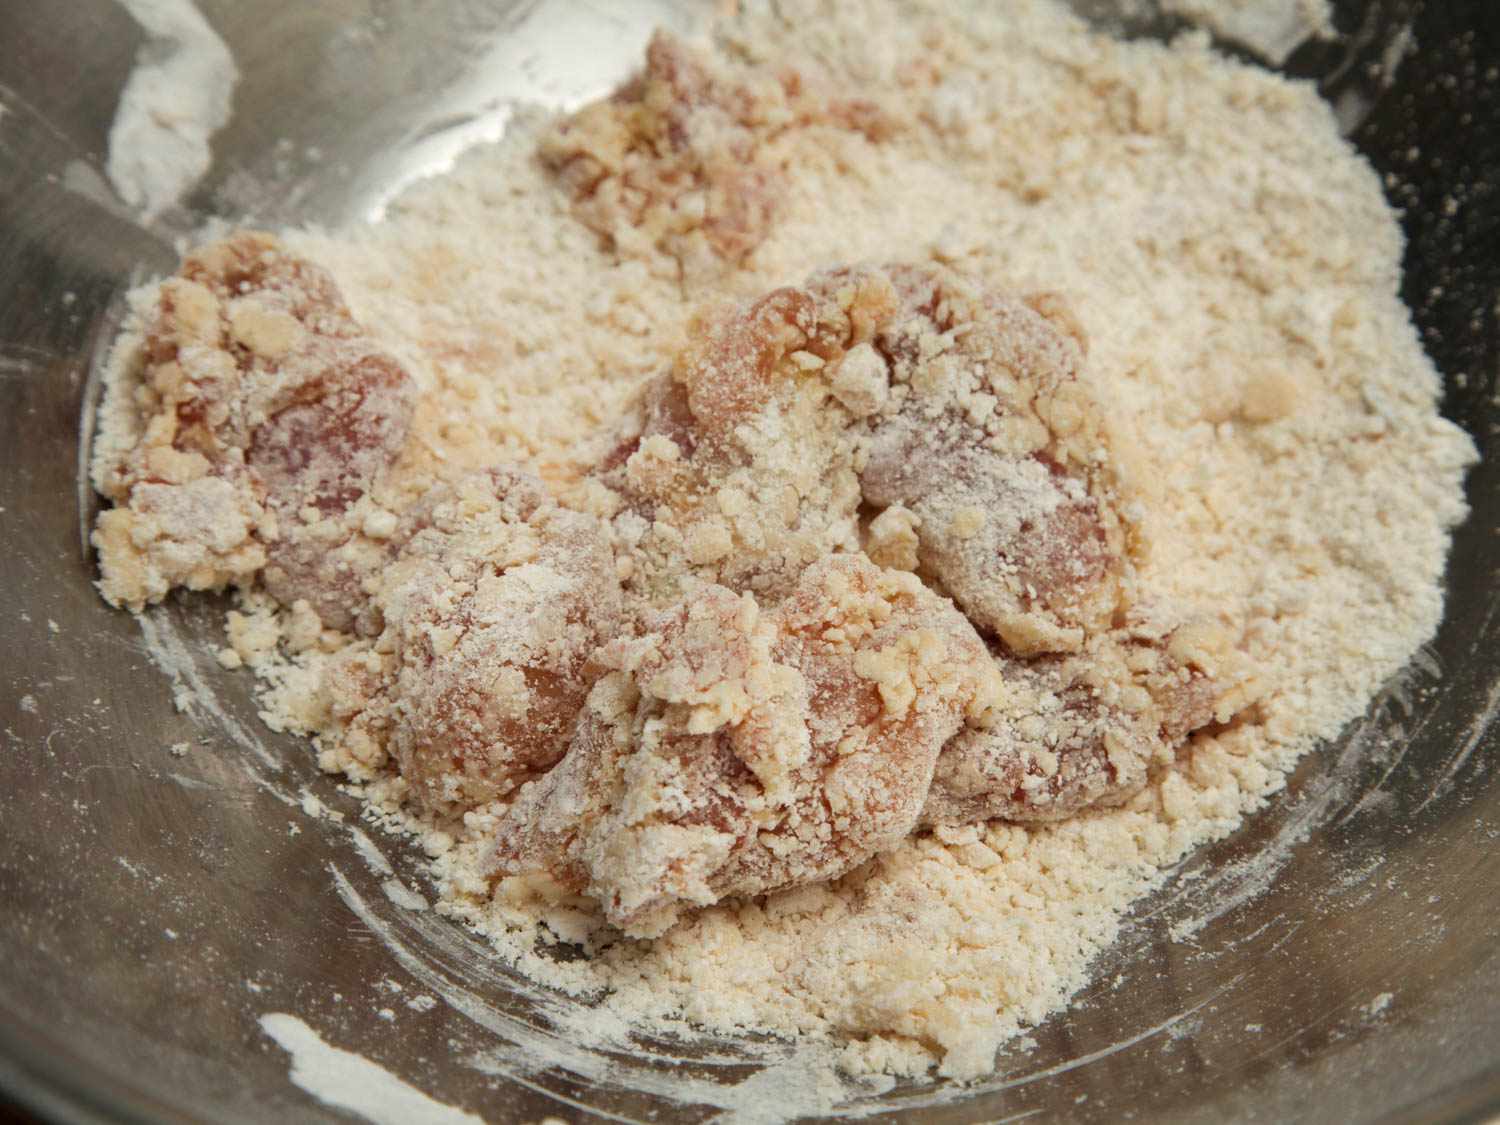 Boneless chicken thighs soaked in egg marinade and dredged in a semi-moist breading of flour and cornstarch.